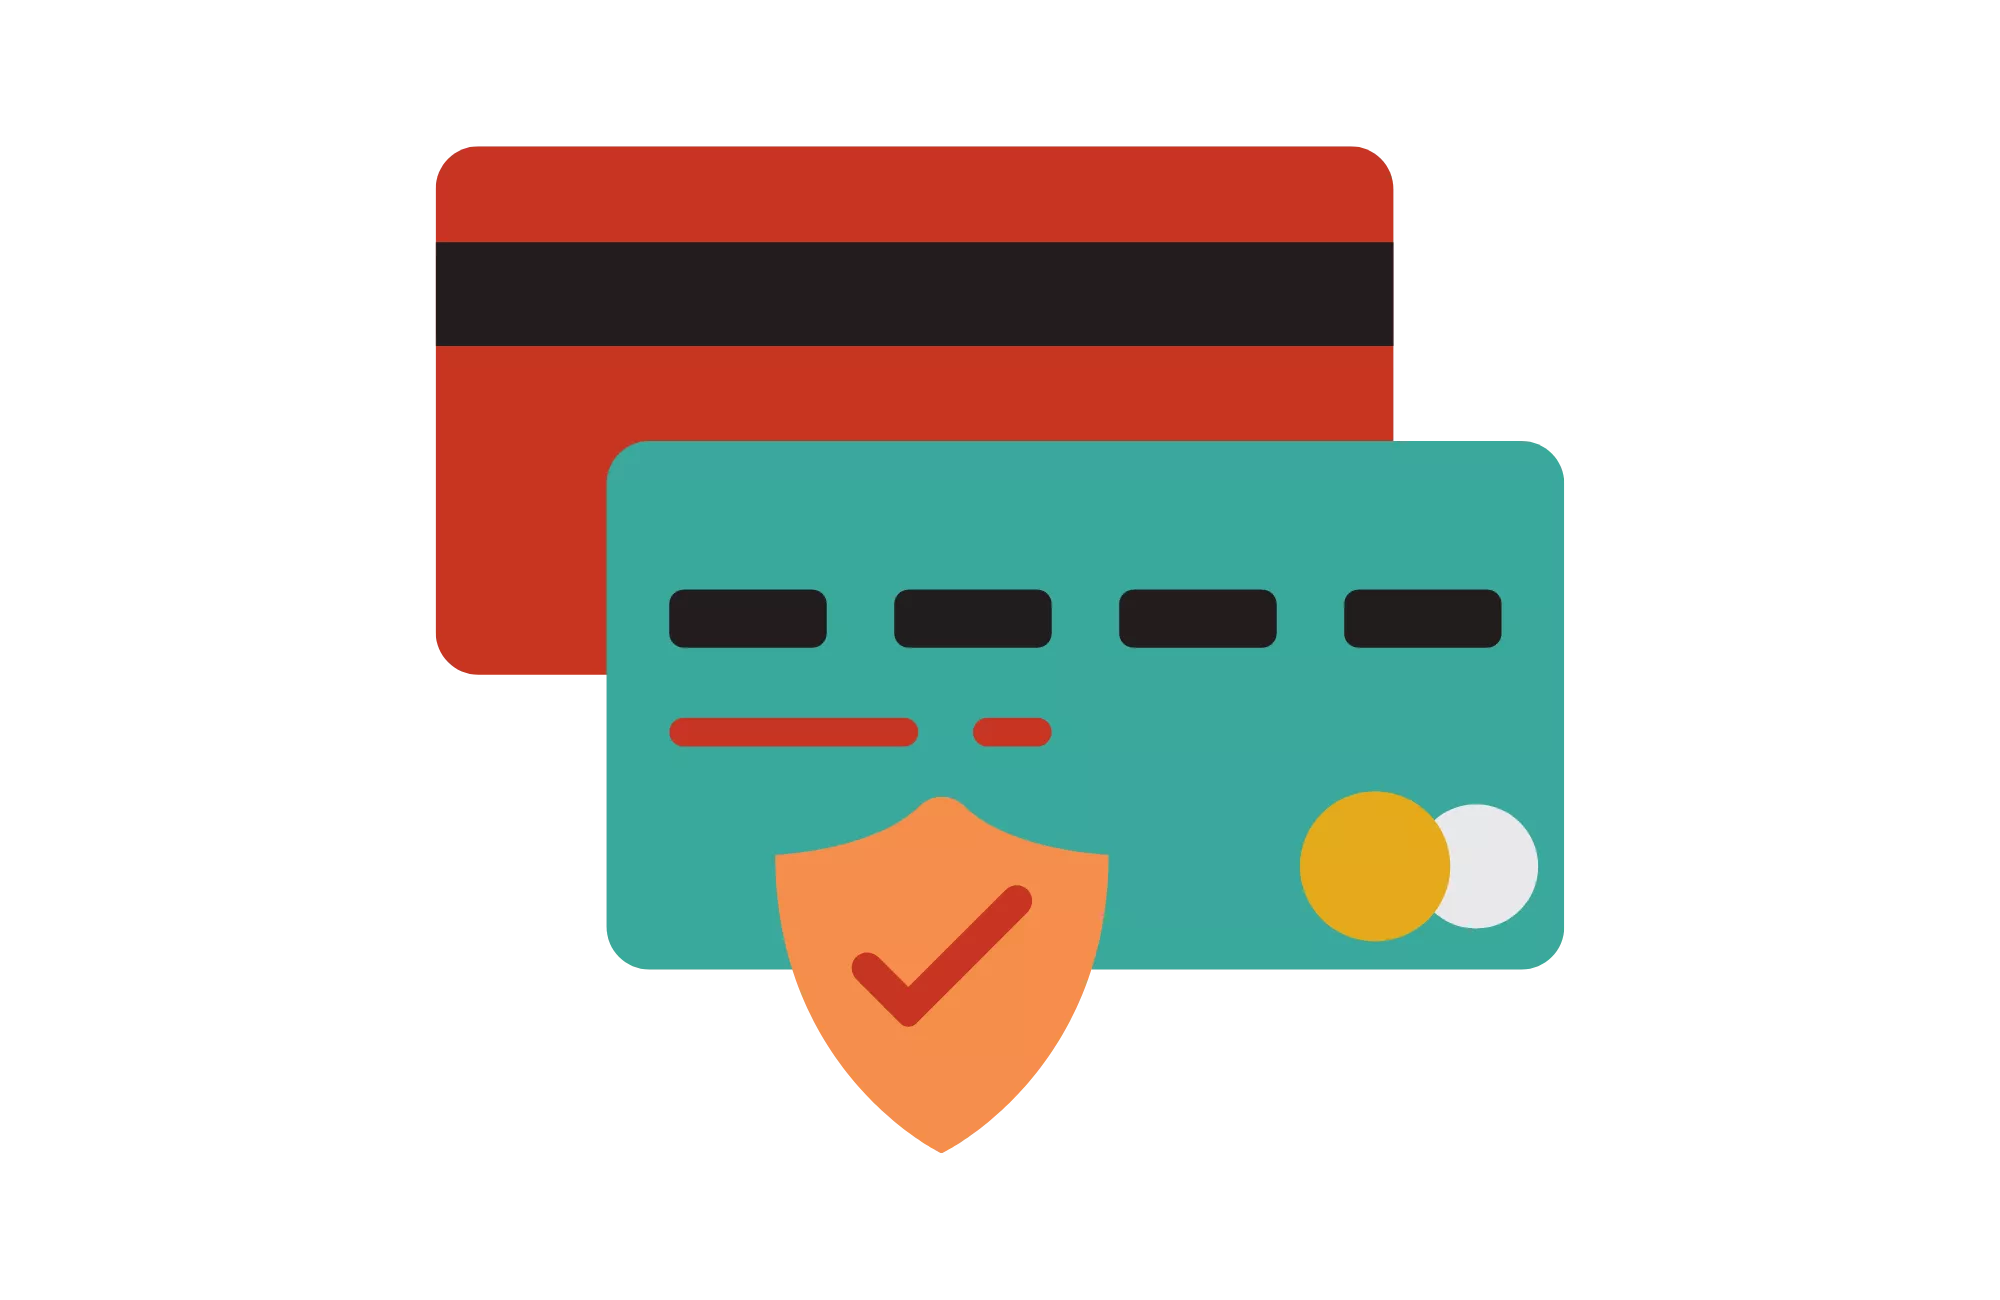 A secure credit card transaction that will incur an affordable payment gateway fee.